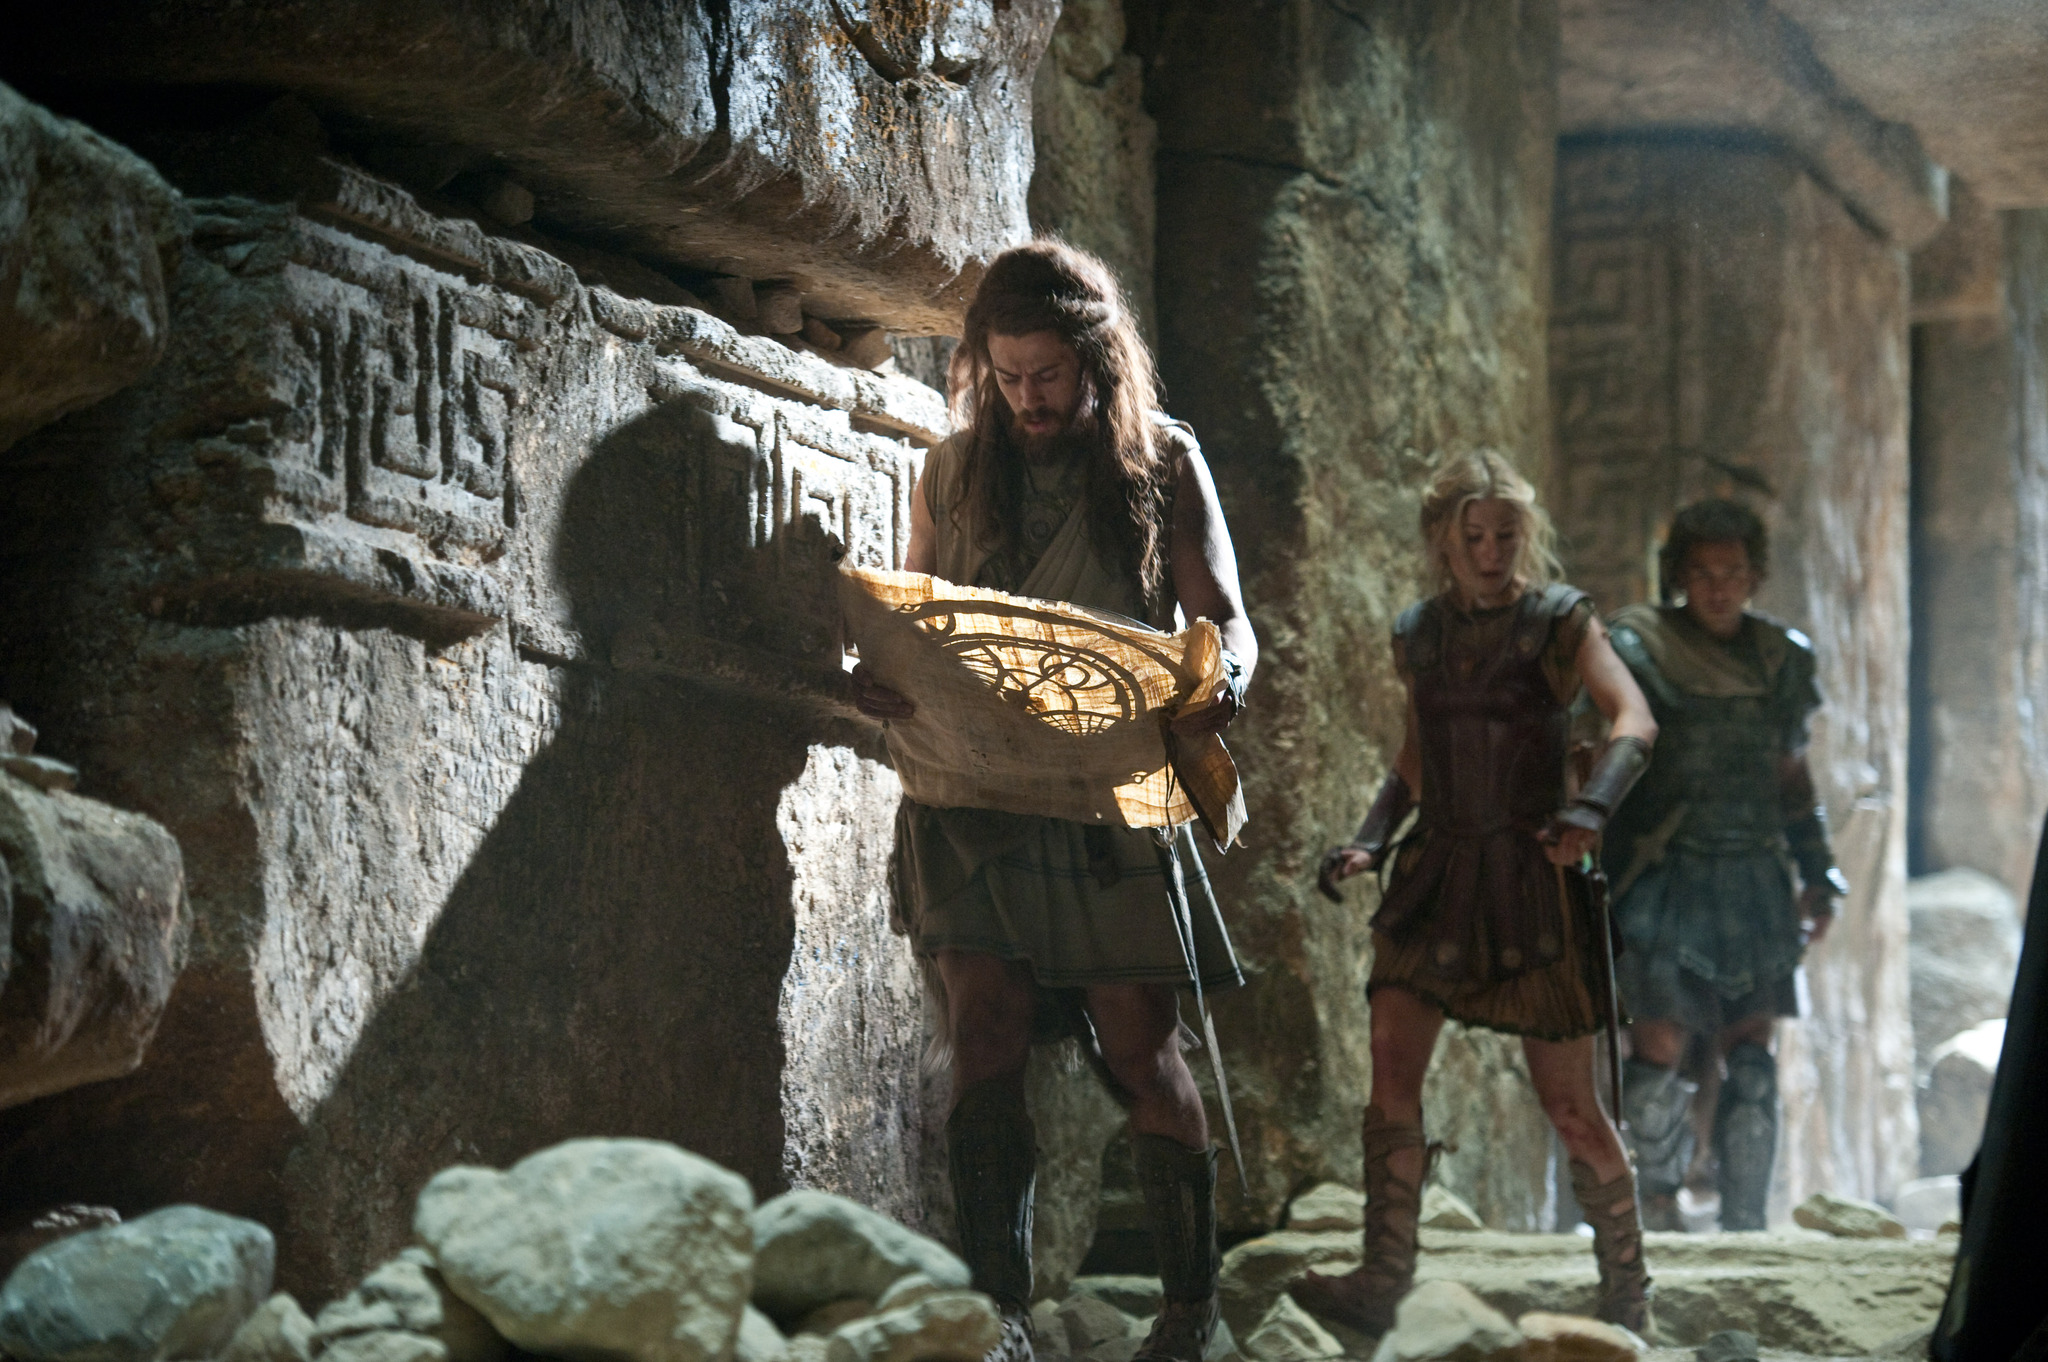 Still of Rosamund Pike, Sam Worthington and Toby Kebbell in Titanu inirsis (2012)